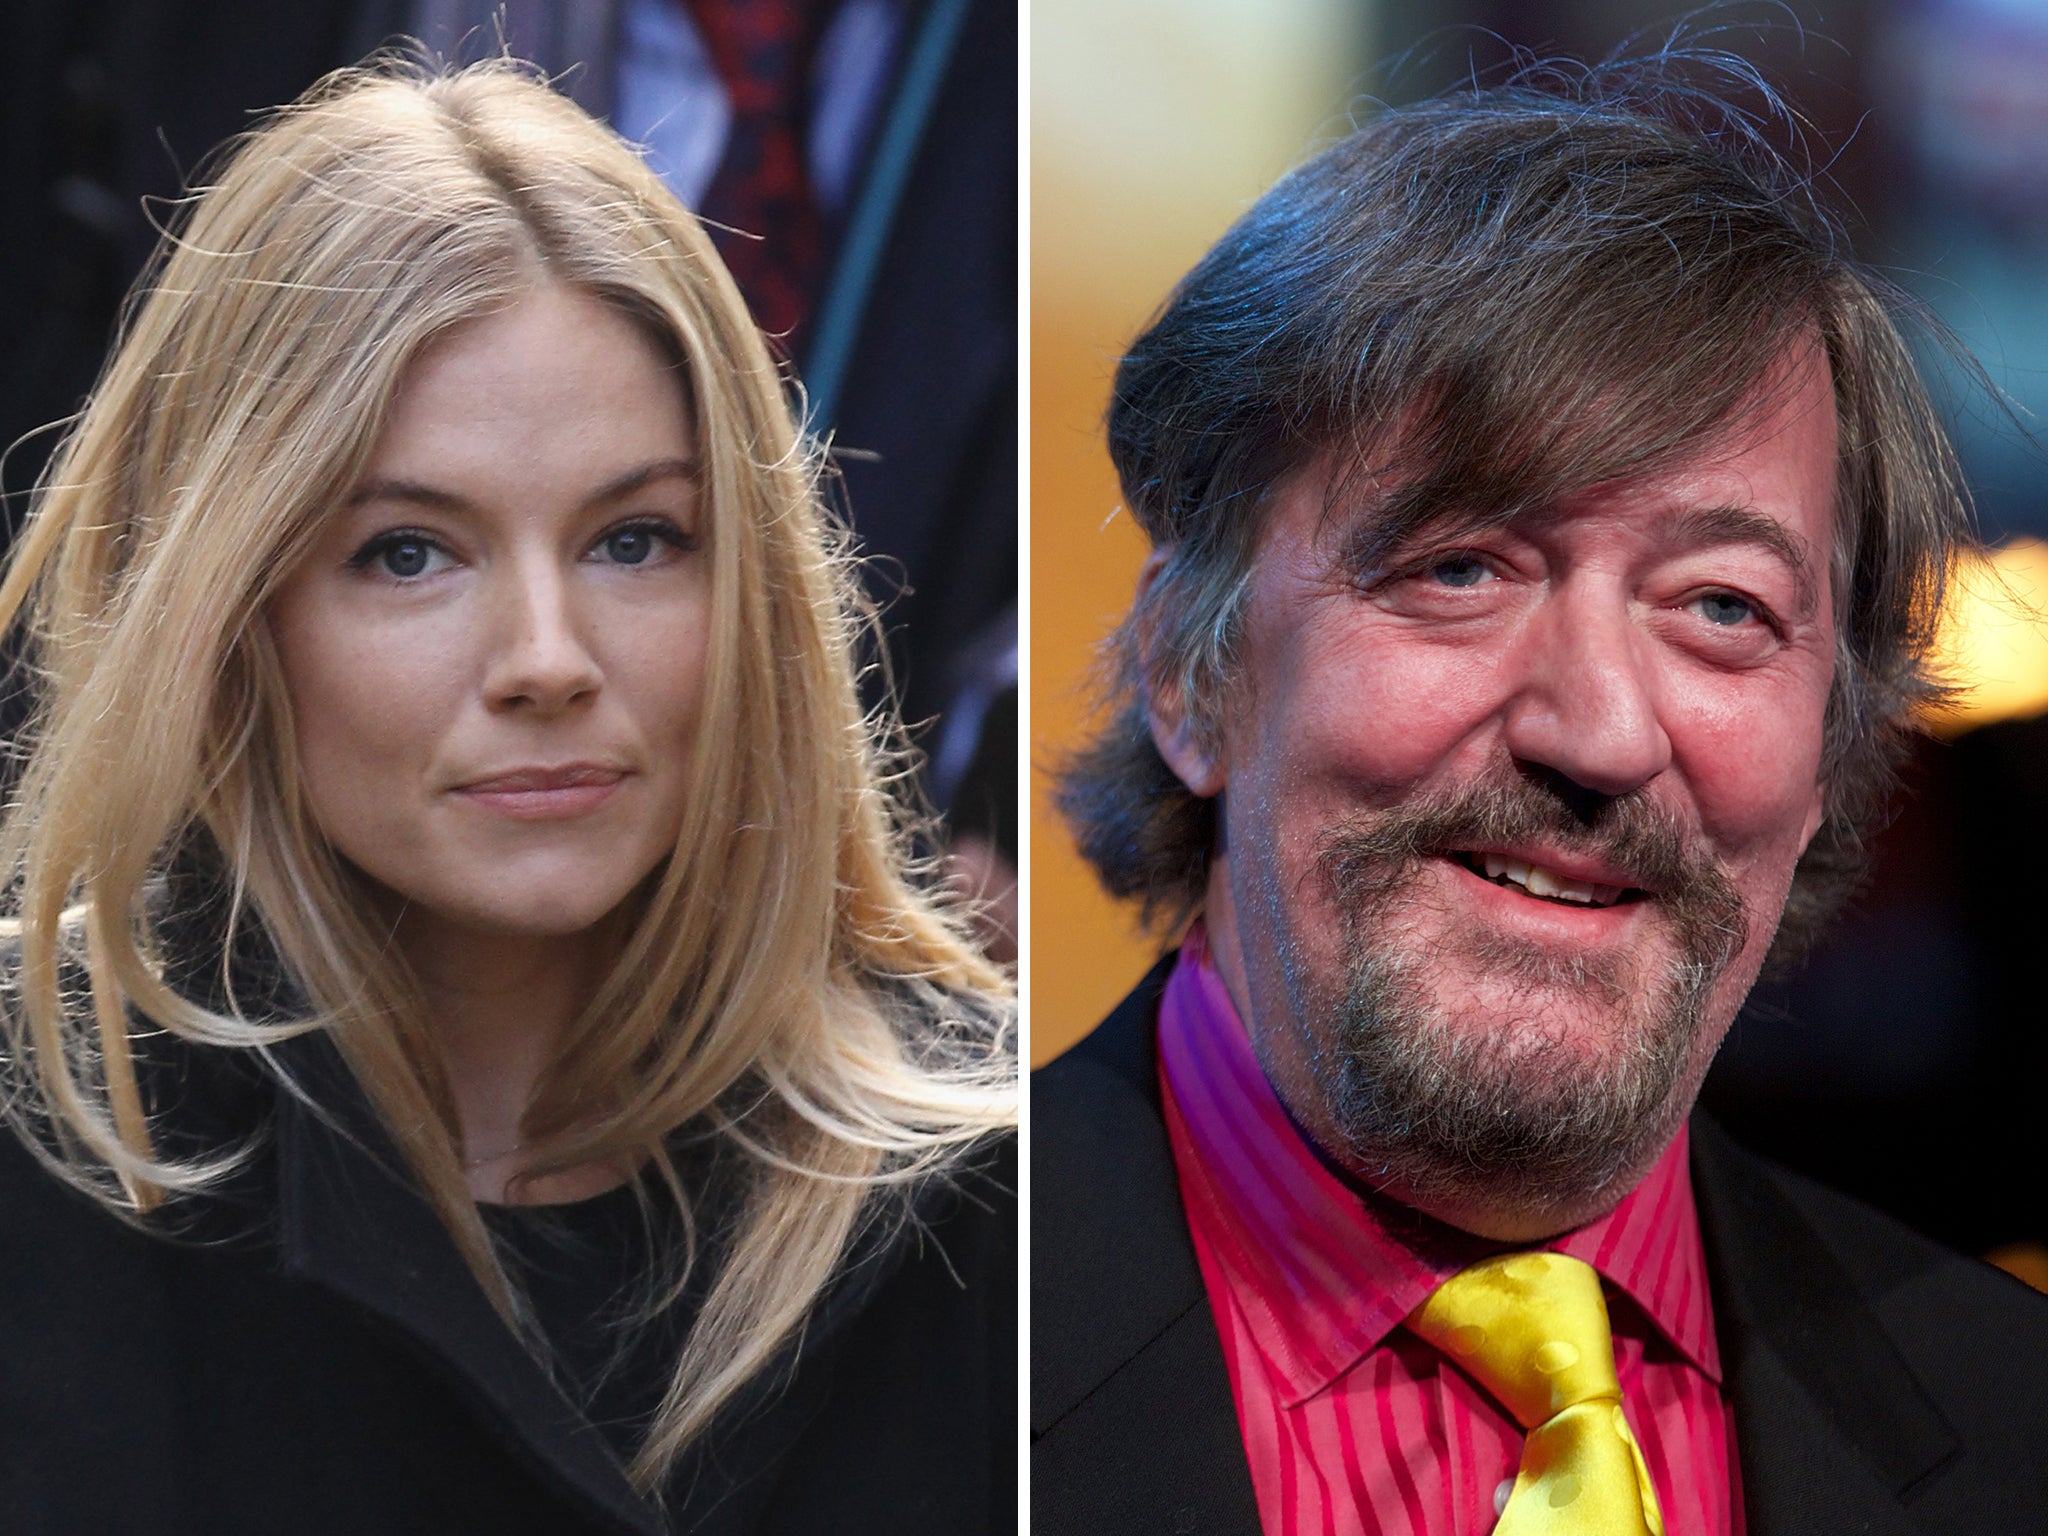 Sienna Miller and Stephen Fry are among the stars to have called for an end to the overfishing